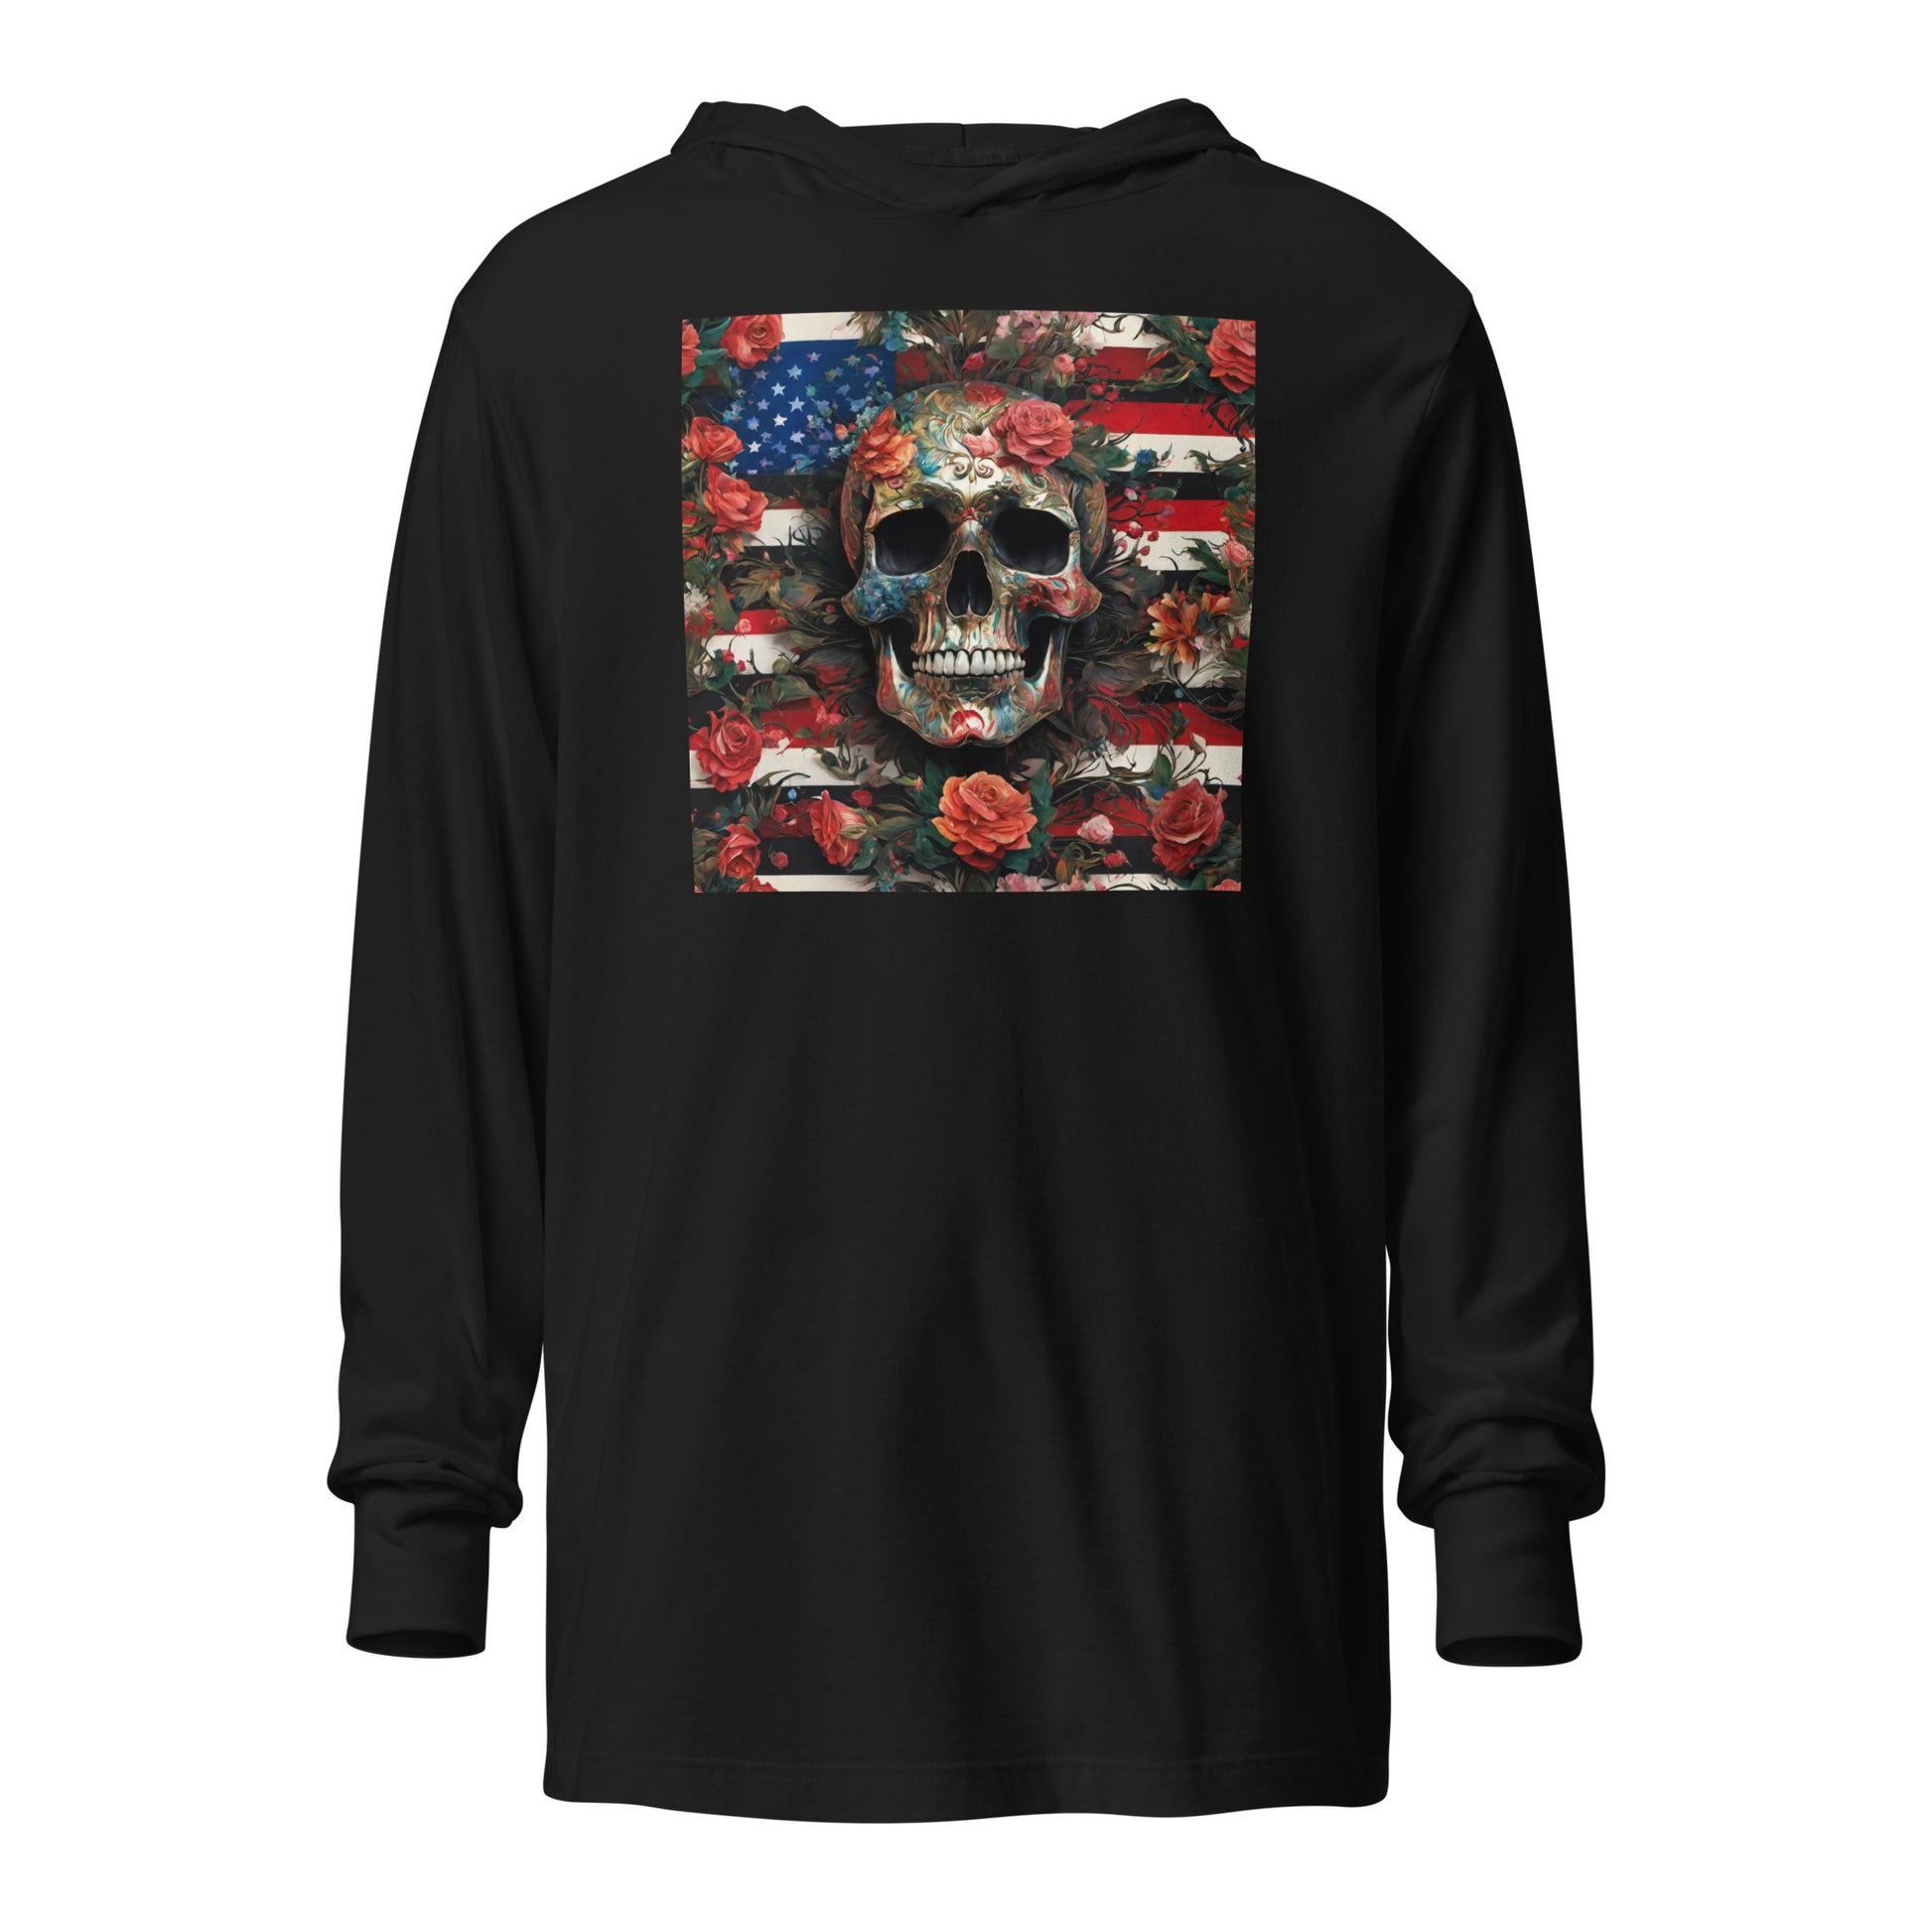 Skull, Roses, and Flag Hooded Long-Sleeve Graphic Tee Black